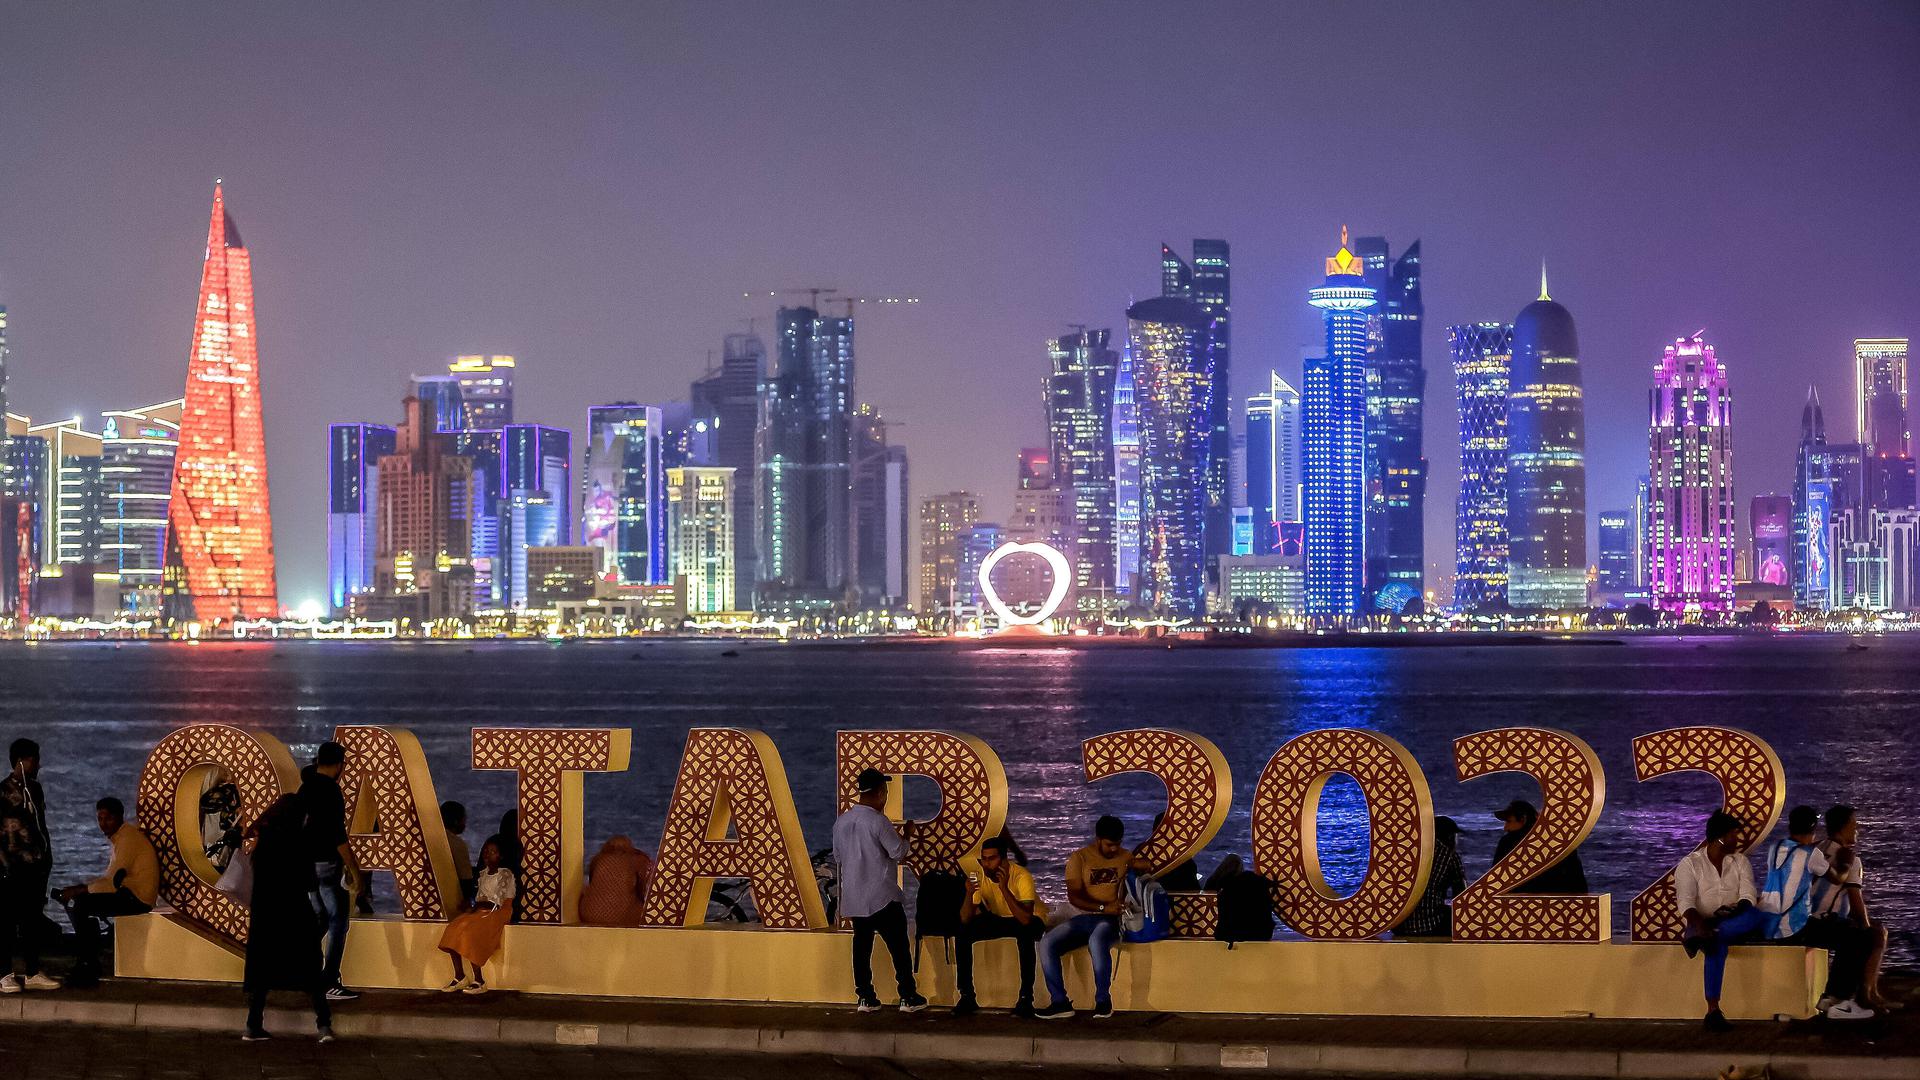  The streets of Doha in the evening The streets of Doha in the evening. Qatar is ready for the start of the FIFA World Cup, WM, Weltmeisterschaft, Fussball in Qatar, which starts on November 20, 2022, in Doha, Qatar, on November 17, 2022. IgorxKralj/PIXSELL